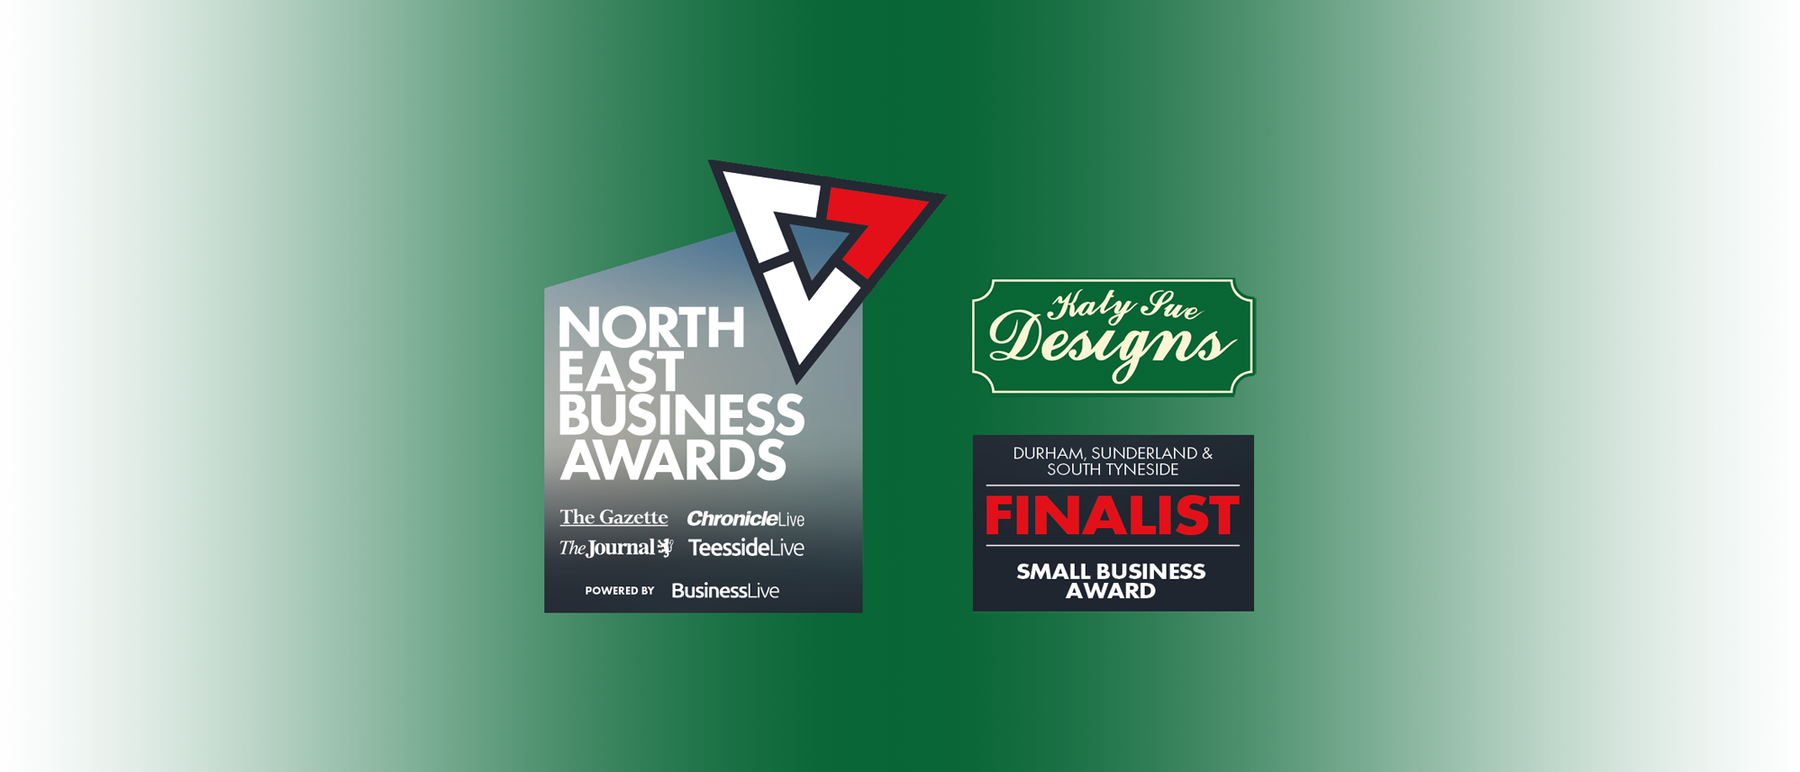 Katy Sue Designs shortlisted for 2020 North East Business Award